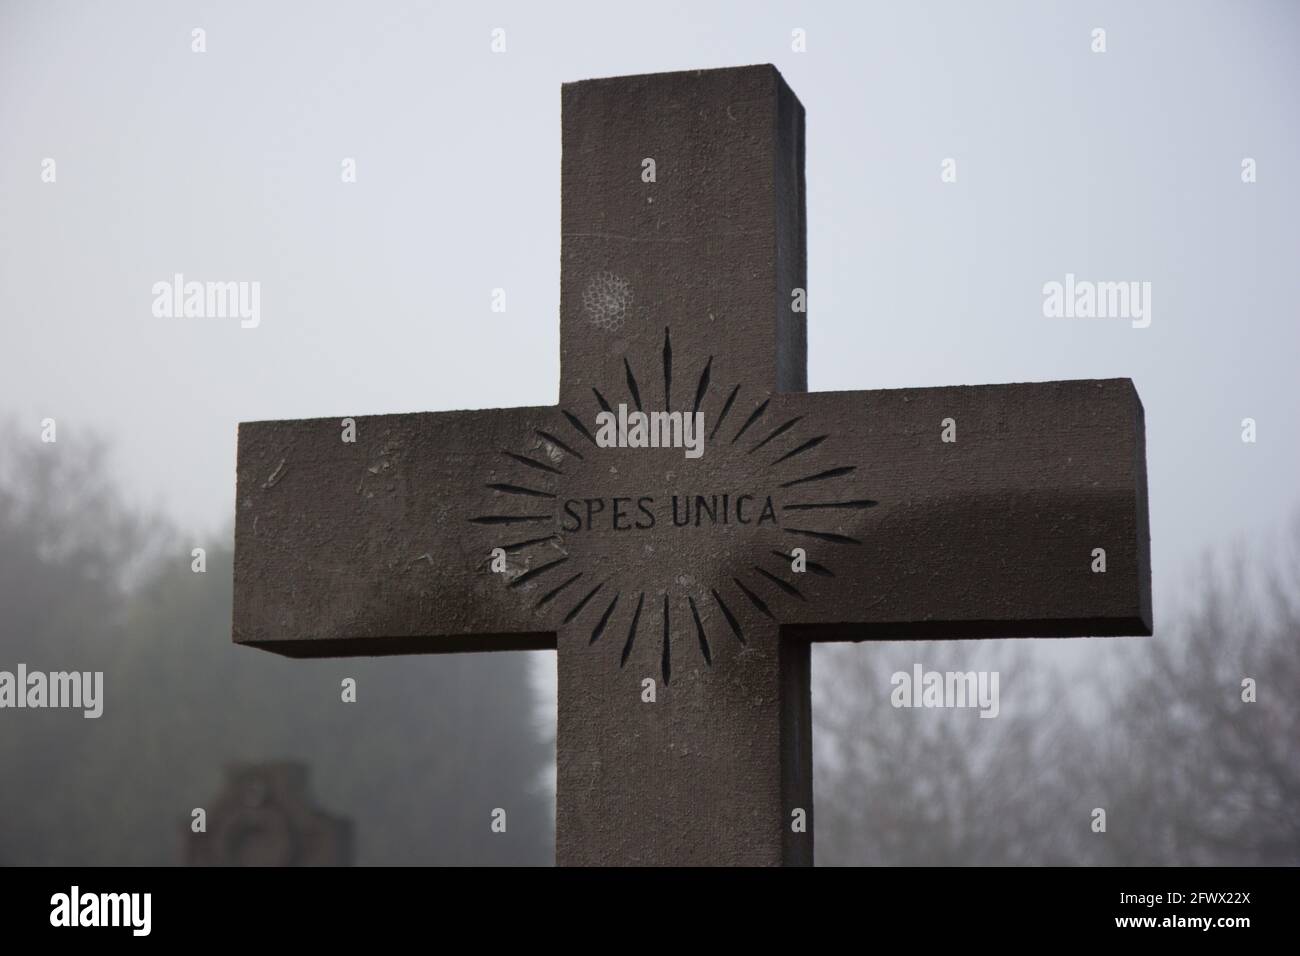 Valenciennes, France, 2017/01/02. Cross on a tombstone with the inscription 'Spes unica' meaning 'The only hope' in the fog at Saint Roch cemetery. Stock Photo